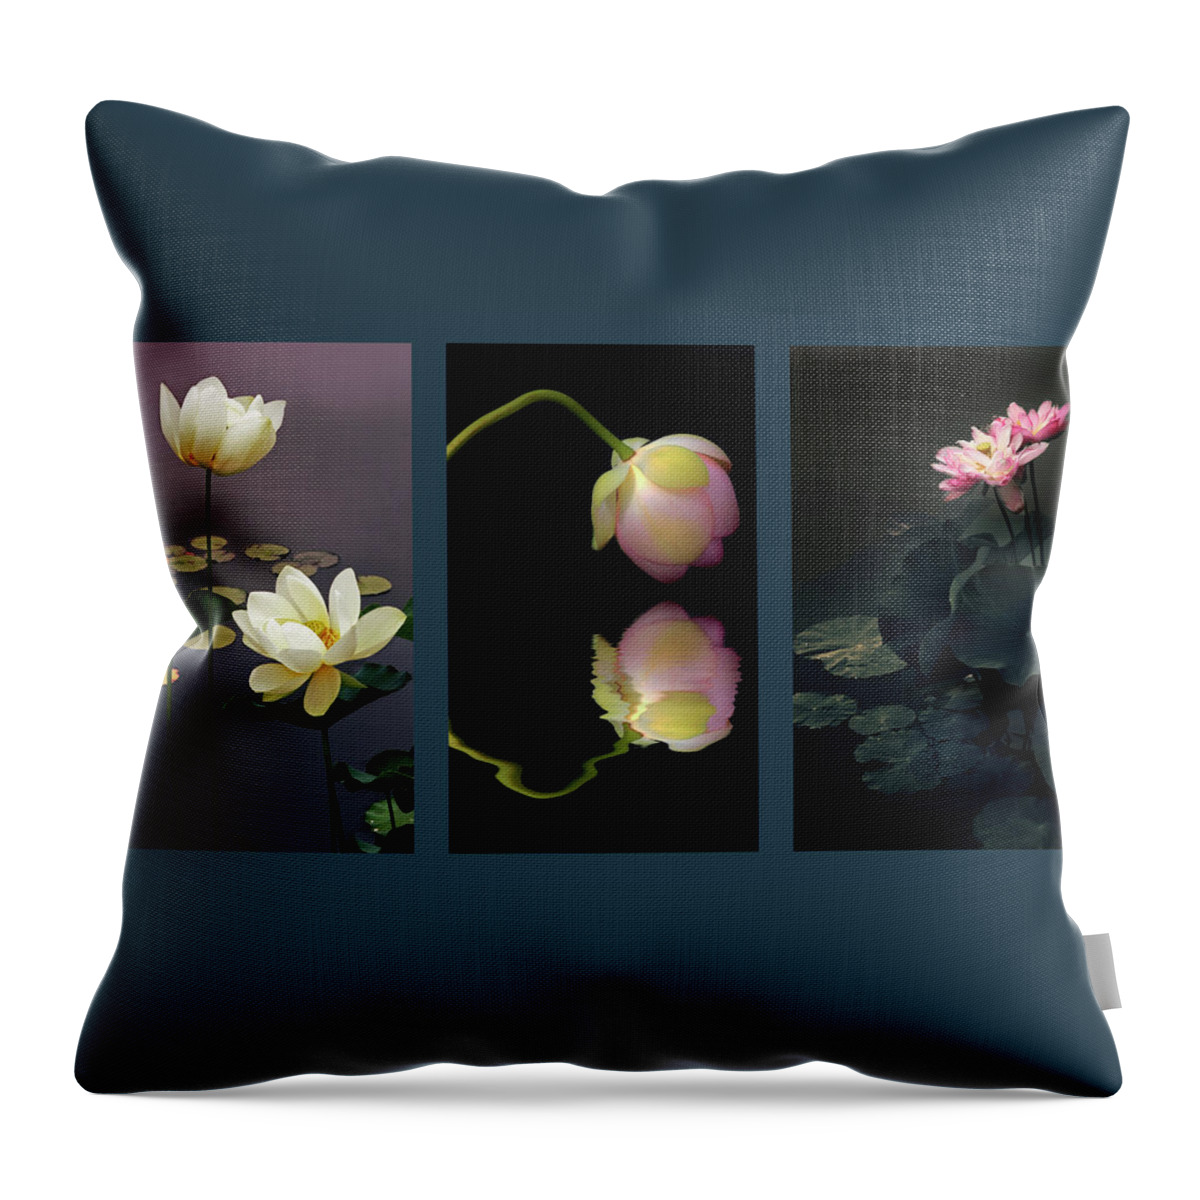 Lily Pad. Pond Throw Pillow featuring the photograph Lotus Blossom Triptych by Jessica Jenney